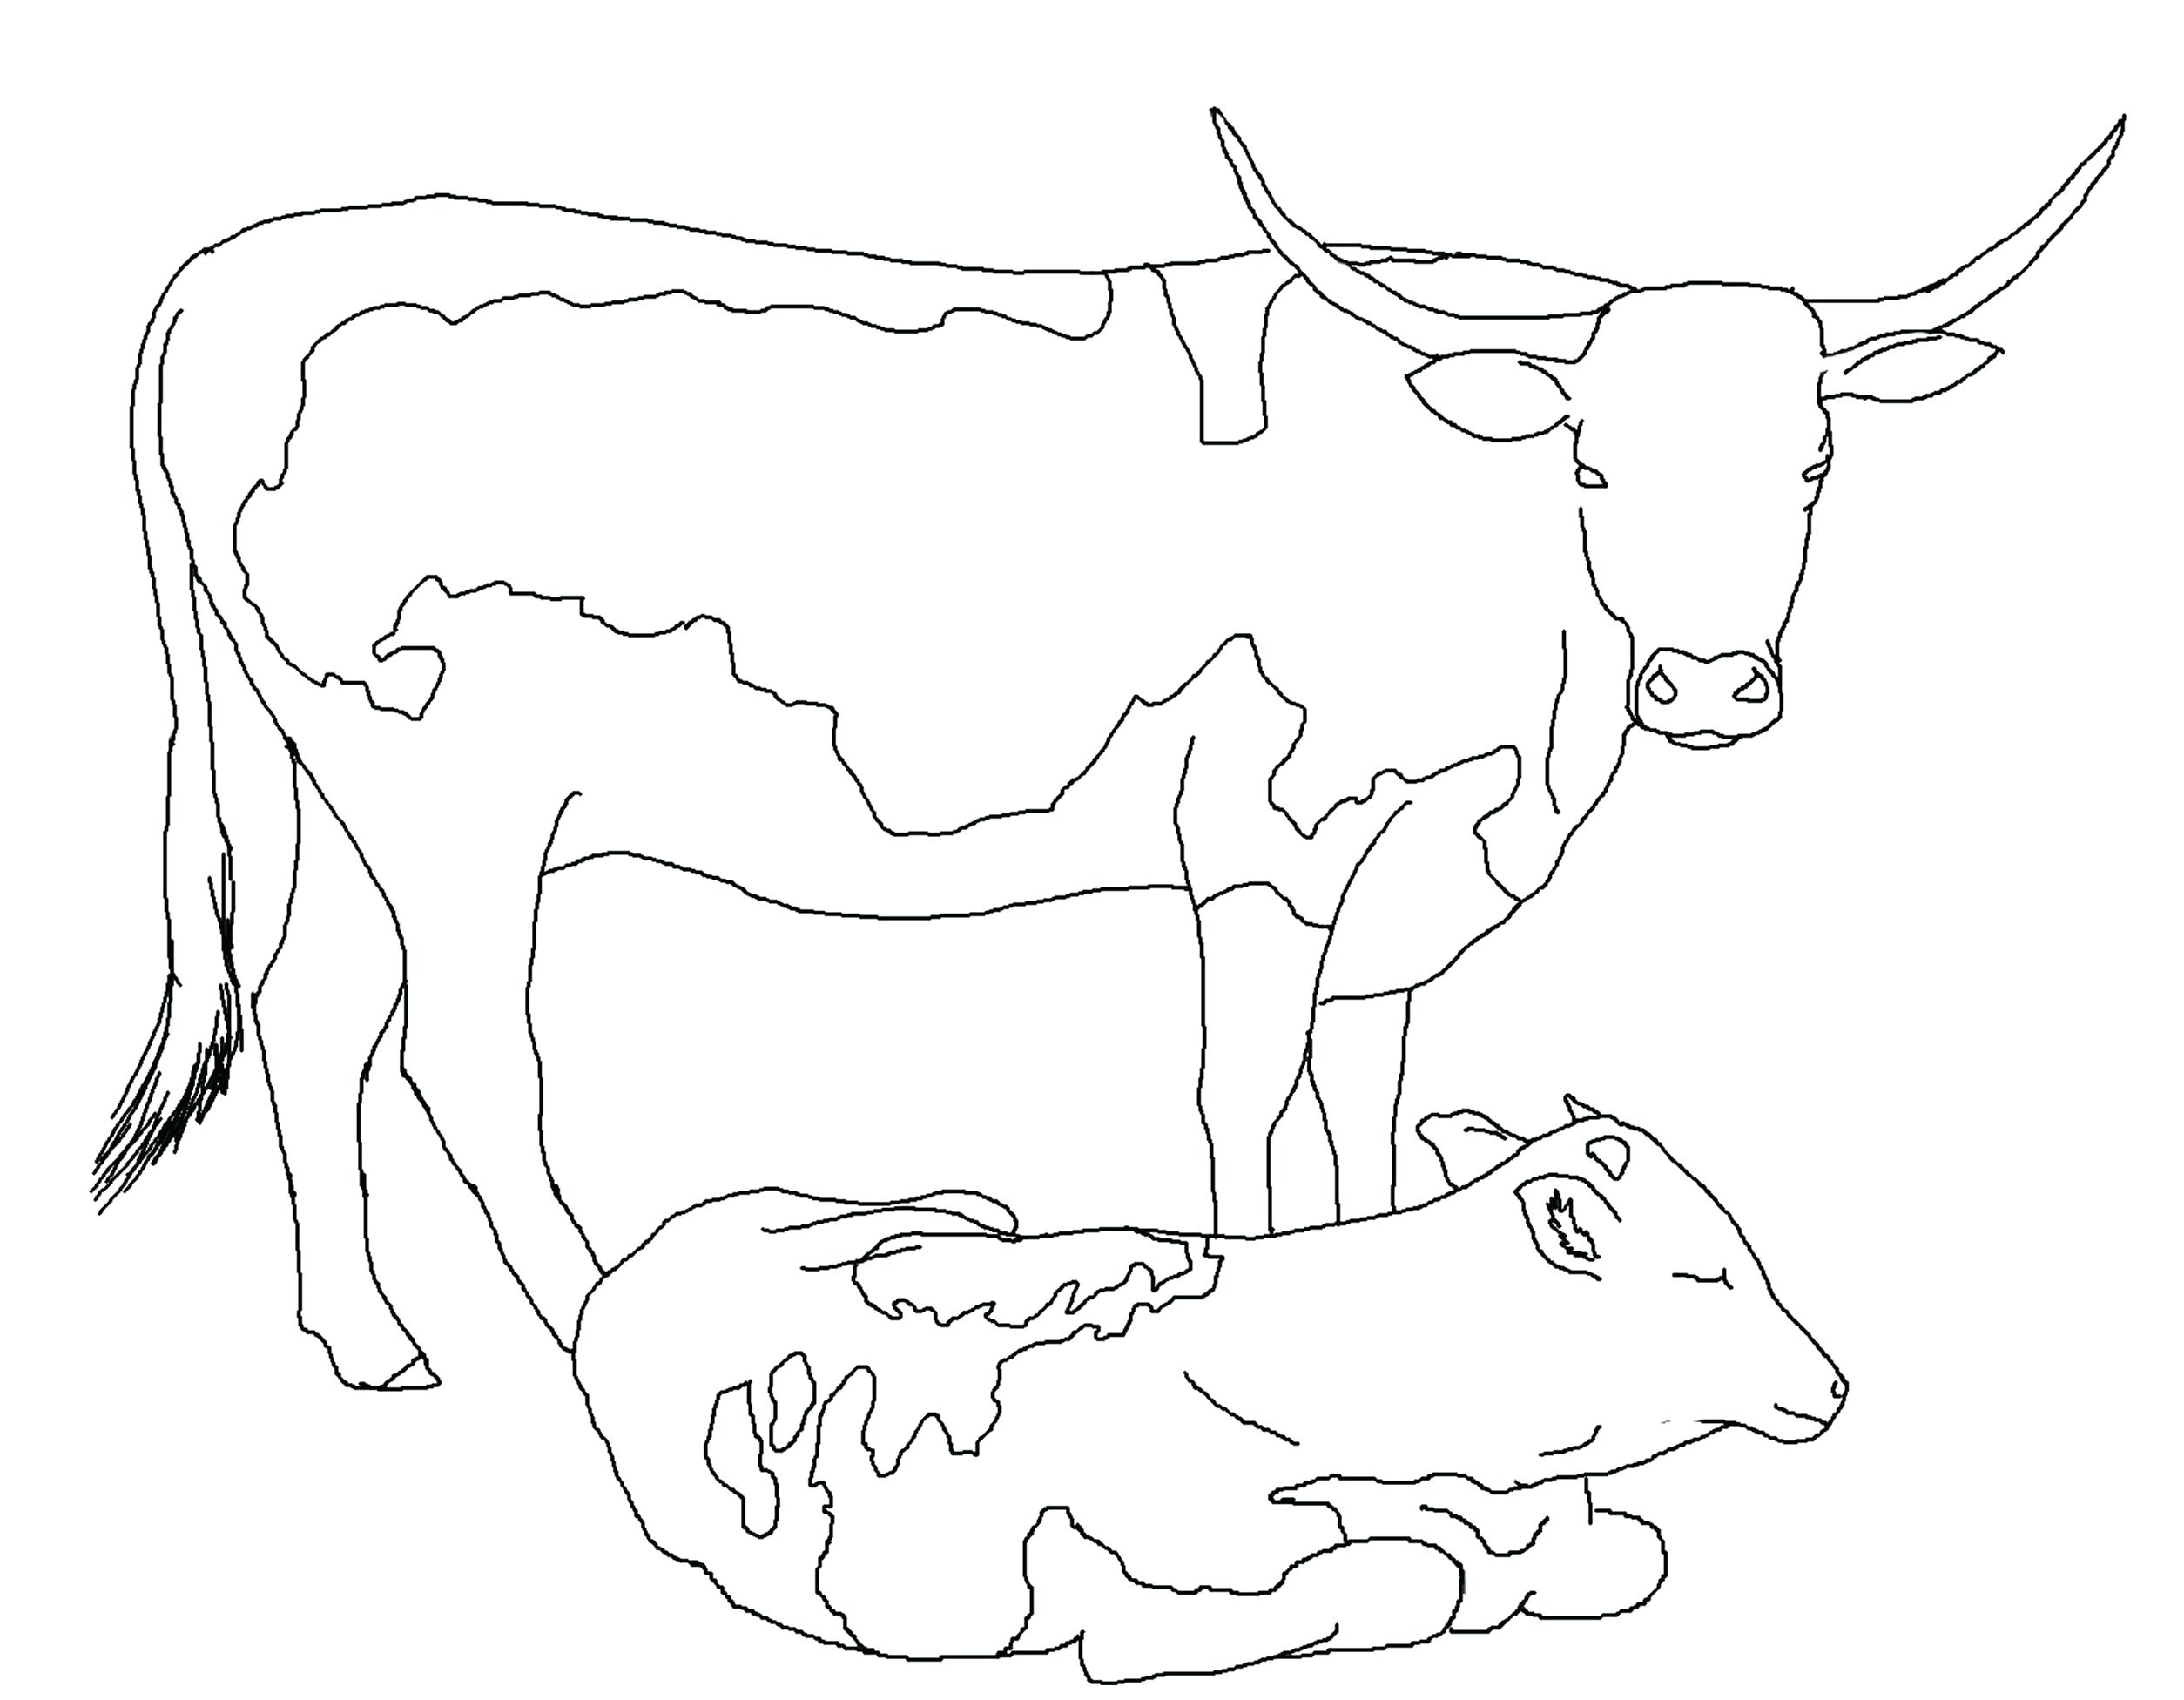 Dairy Cow Coloring Pages at GetColorings.com | Free printable colorings